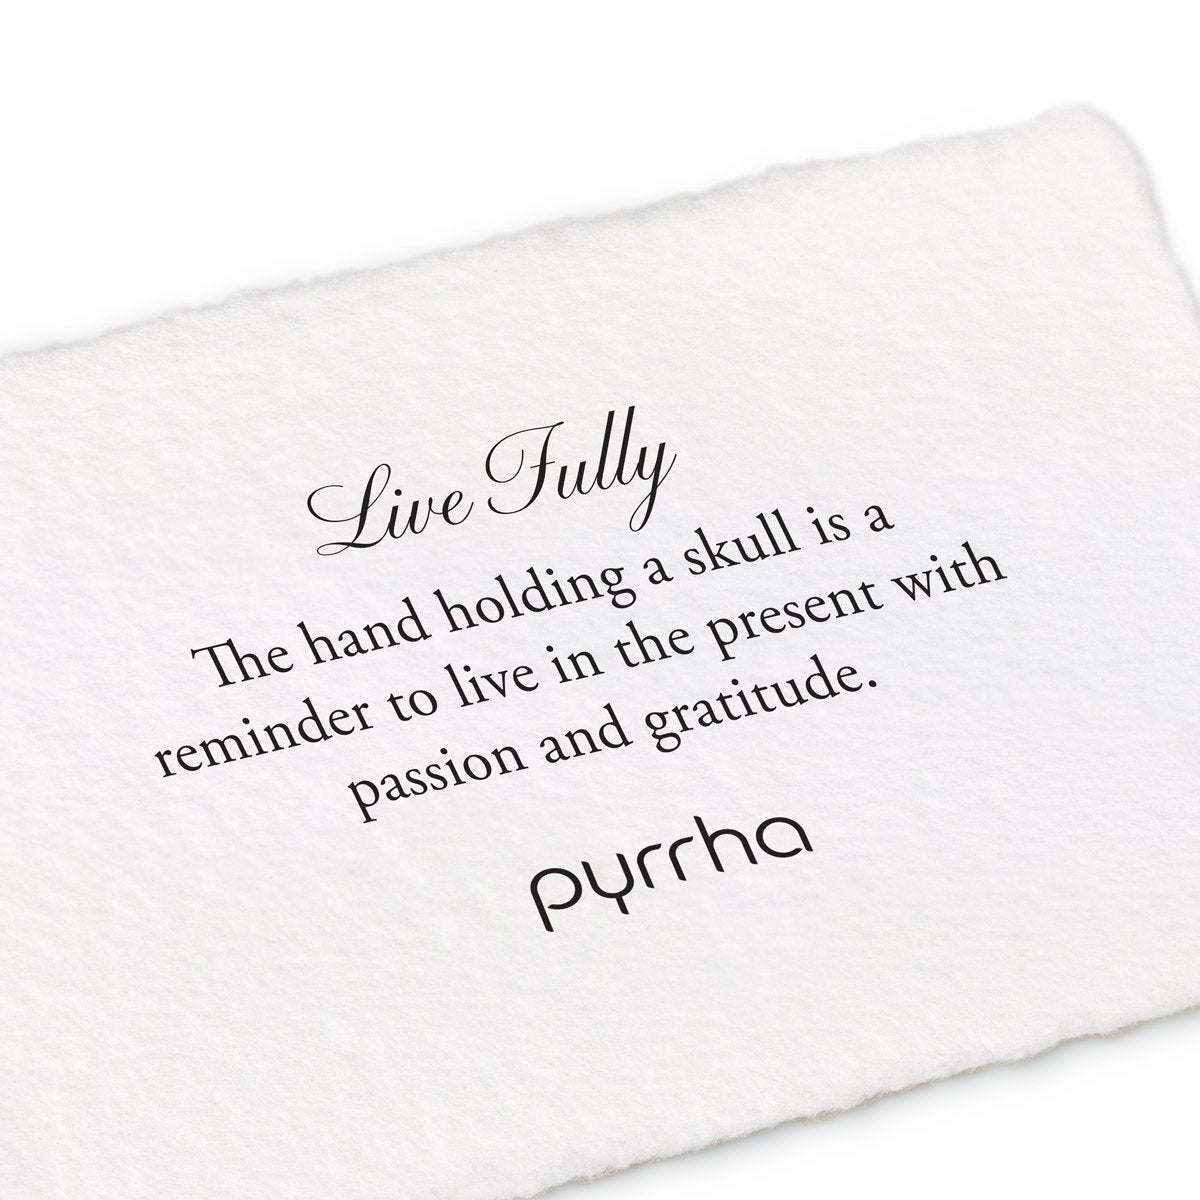 Pyrrha - Live Fully-Men's Accessories-Yaletown-Vancouver-Surrey-Canada